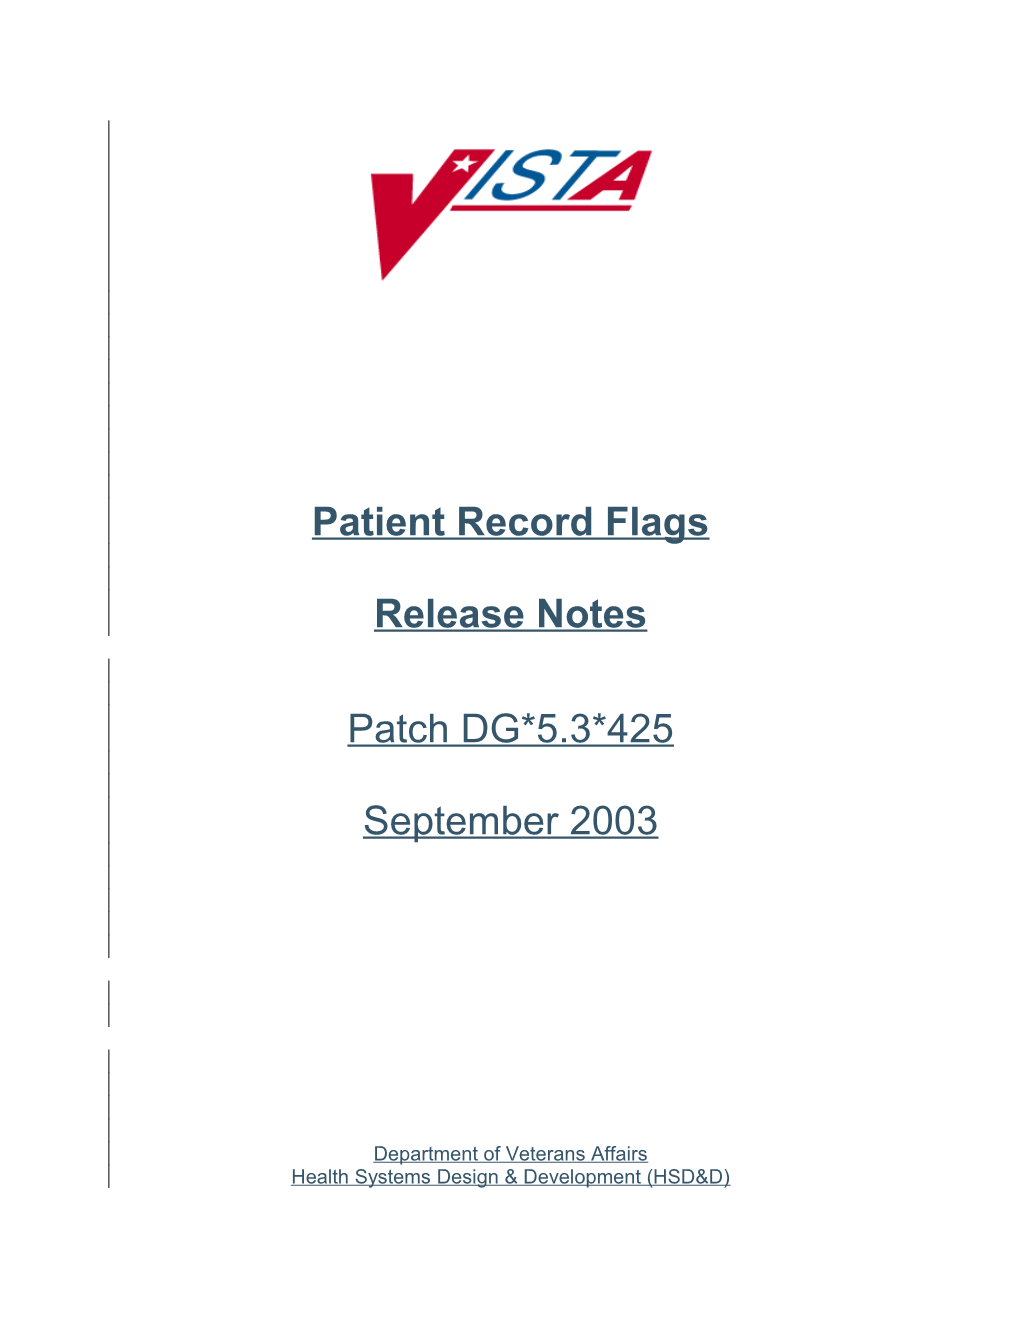 Patient Record Flags V. 2.0 Release Notes